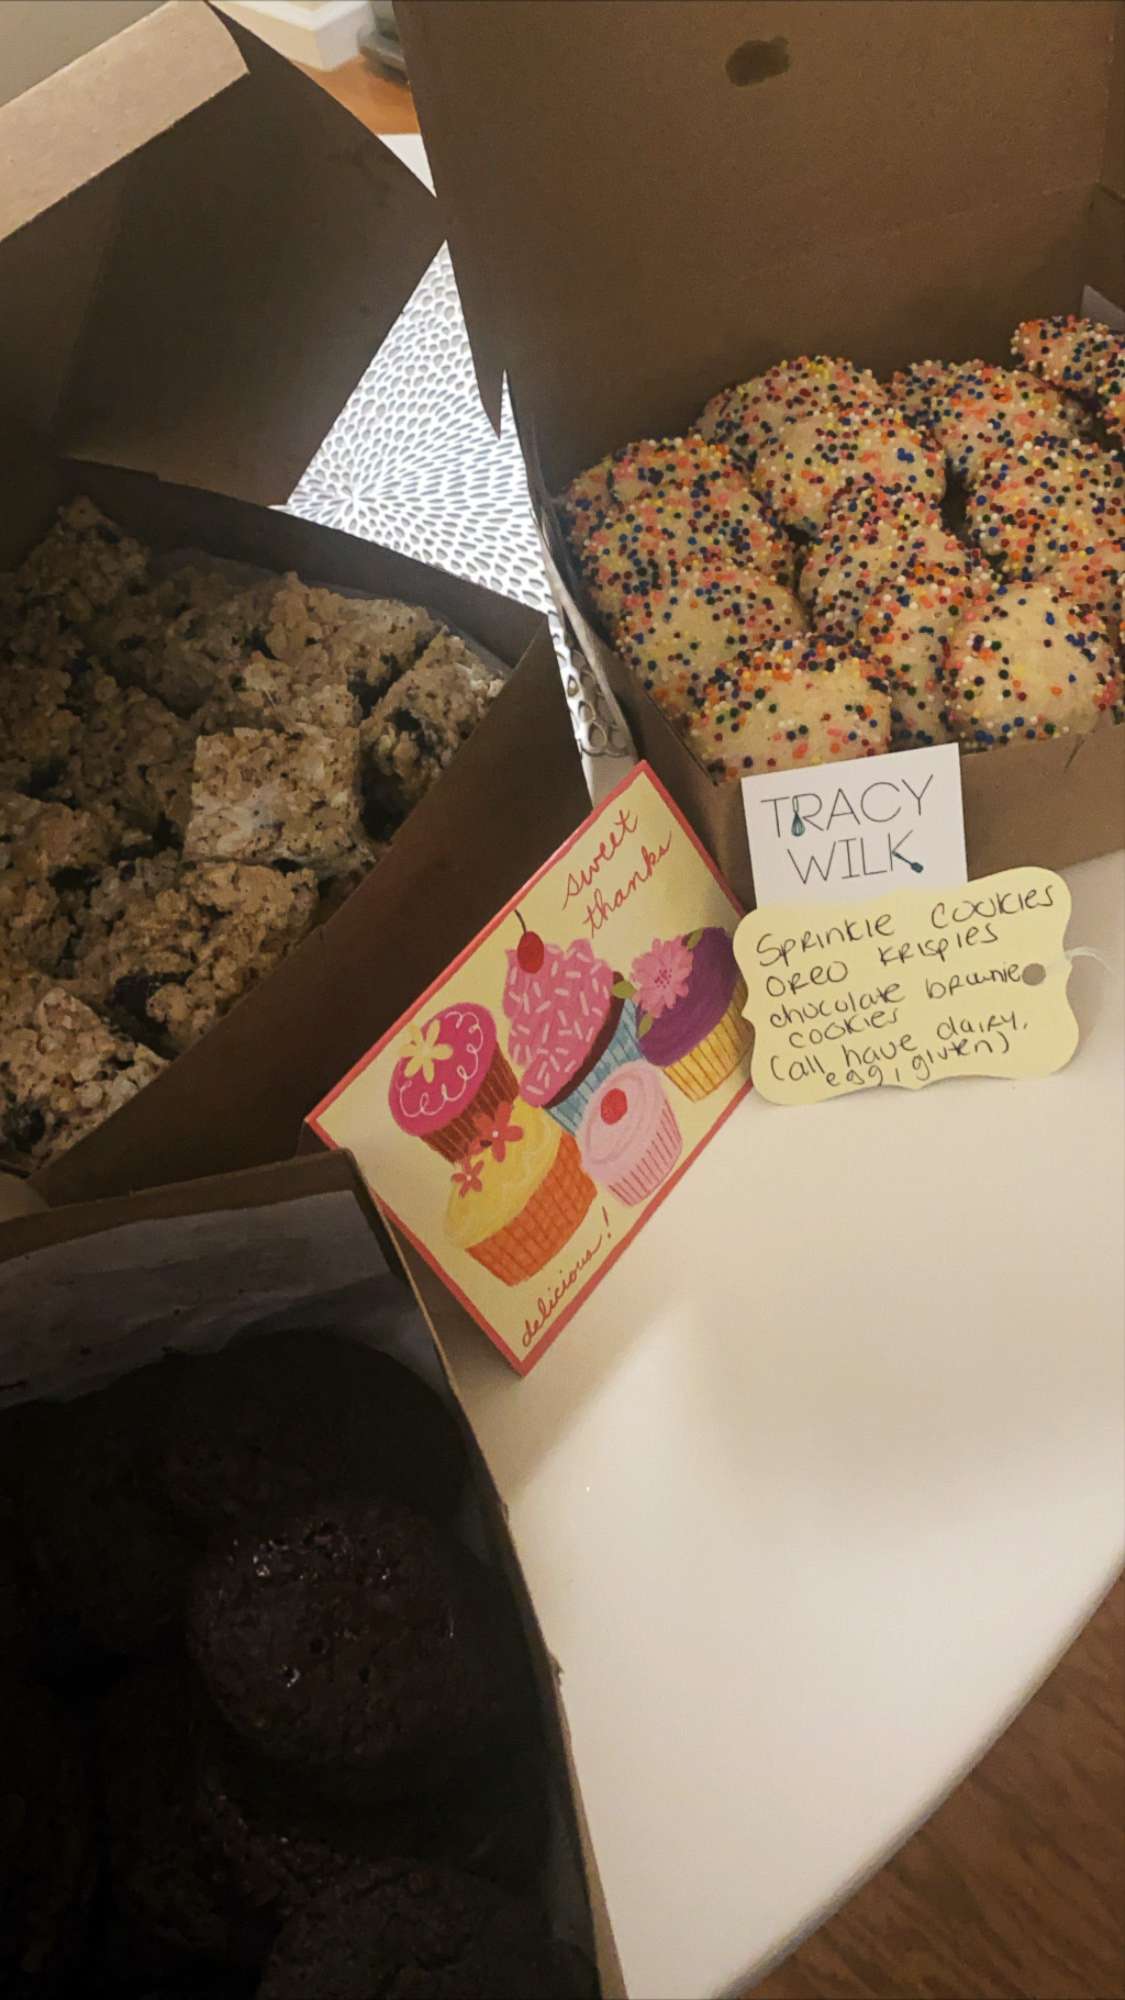 PHOTO: New York Chef Tracy Wilk bakes items for hospital workers on the front lines of the coronavirus epidemic. Sprinkle cookies are one of her top baked goods that she sends their way.